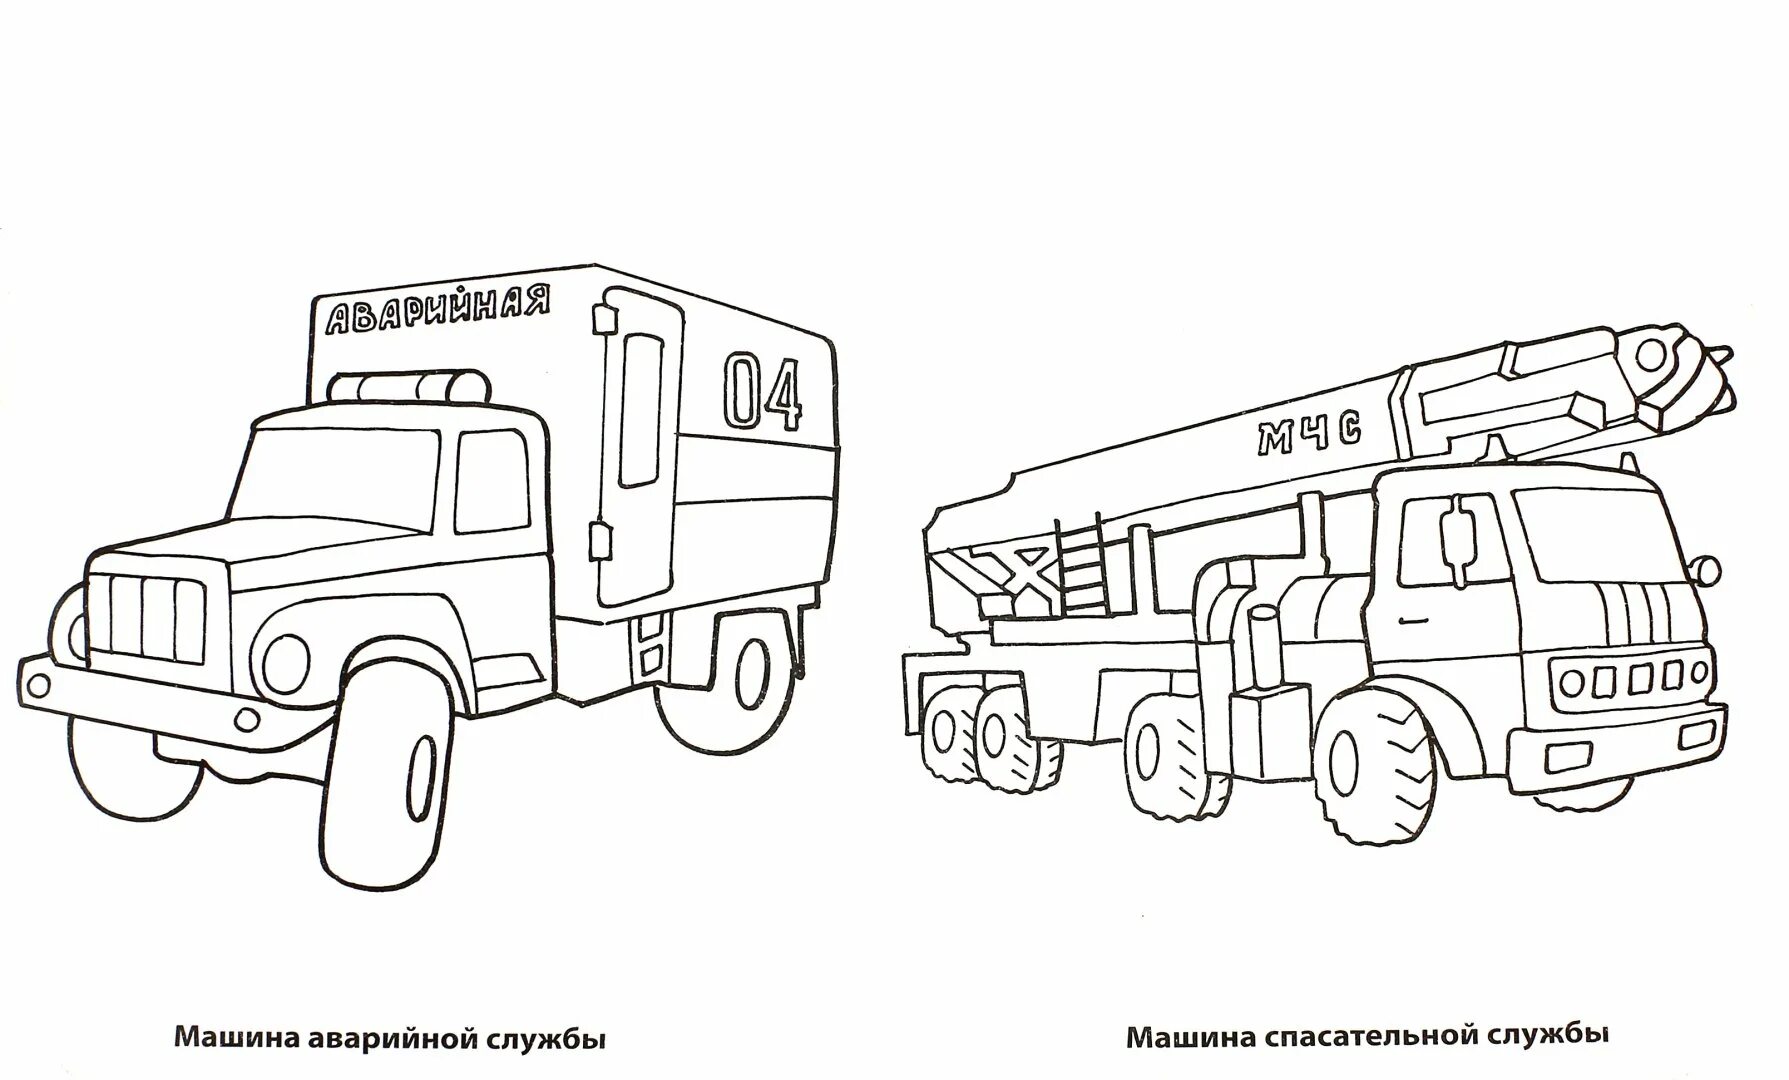 Coloring pages of special vehicles for children aged 5-6